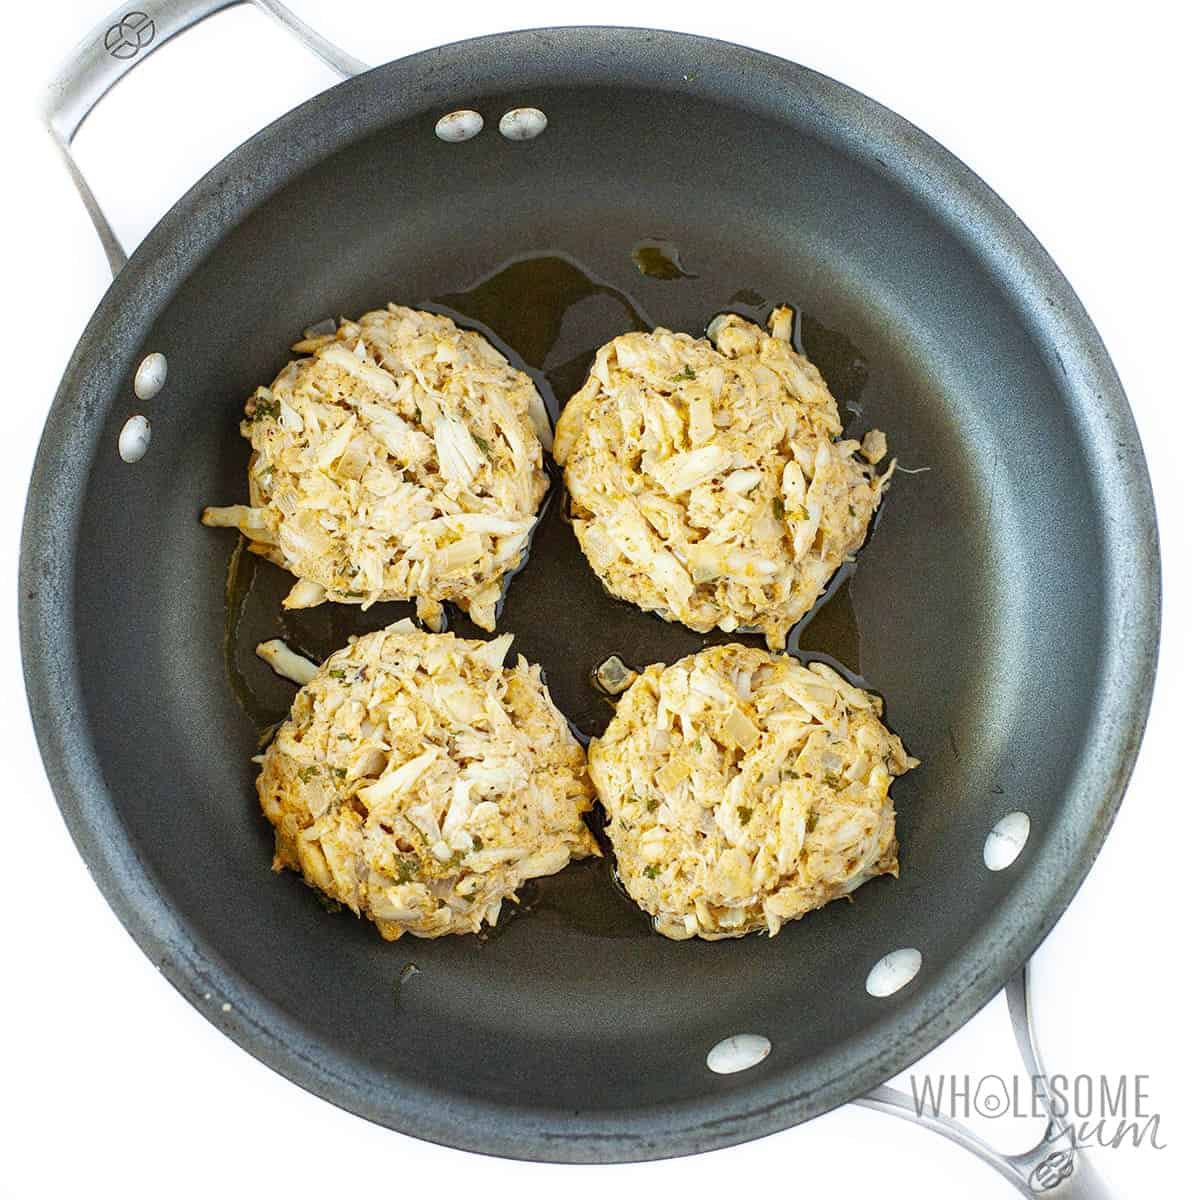 Keto crab cakes in a skillet.